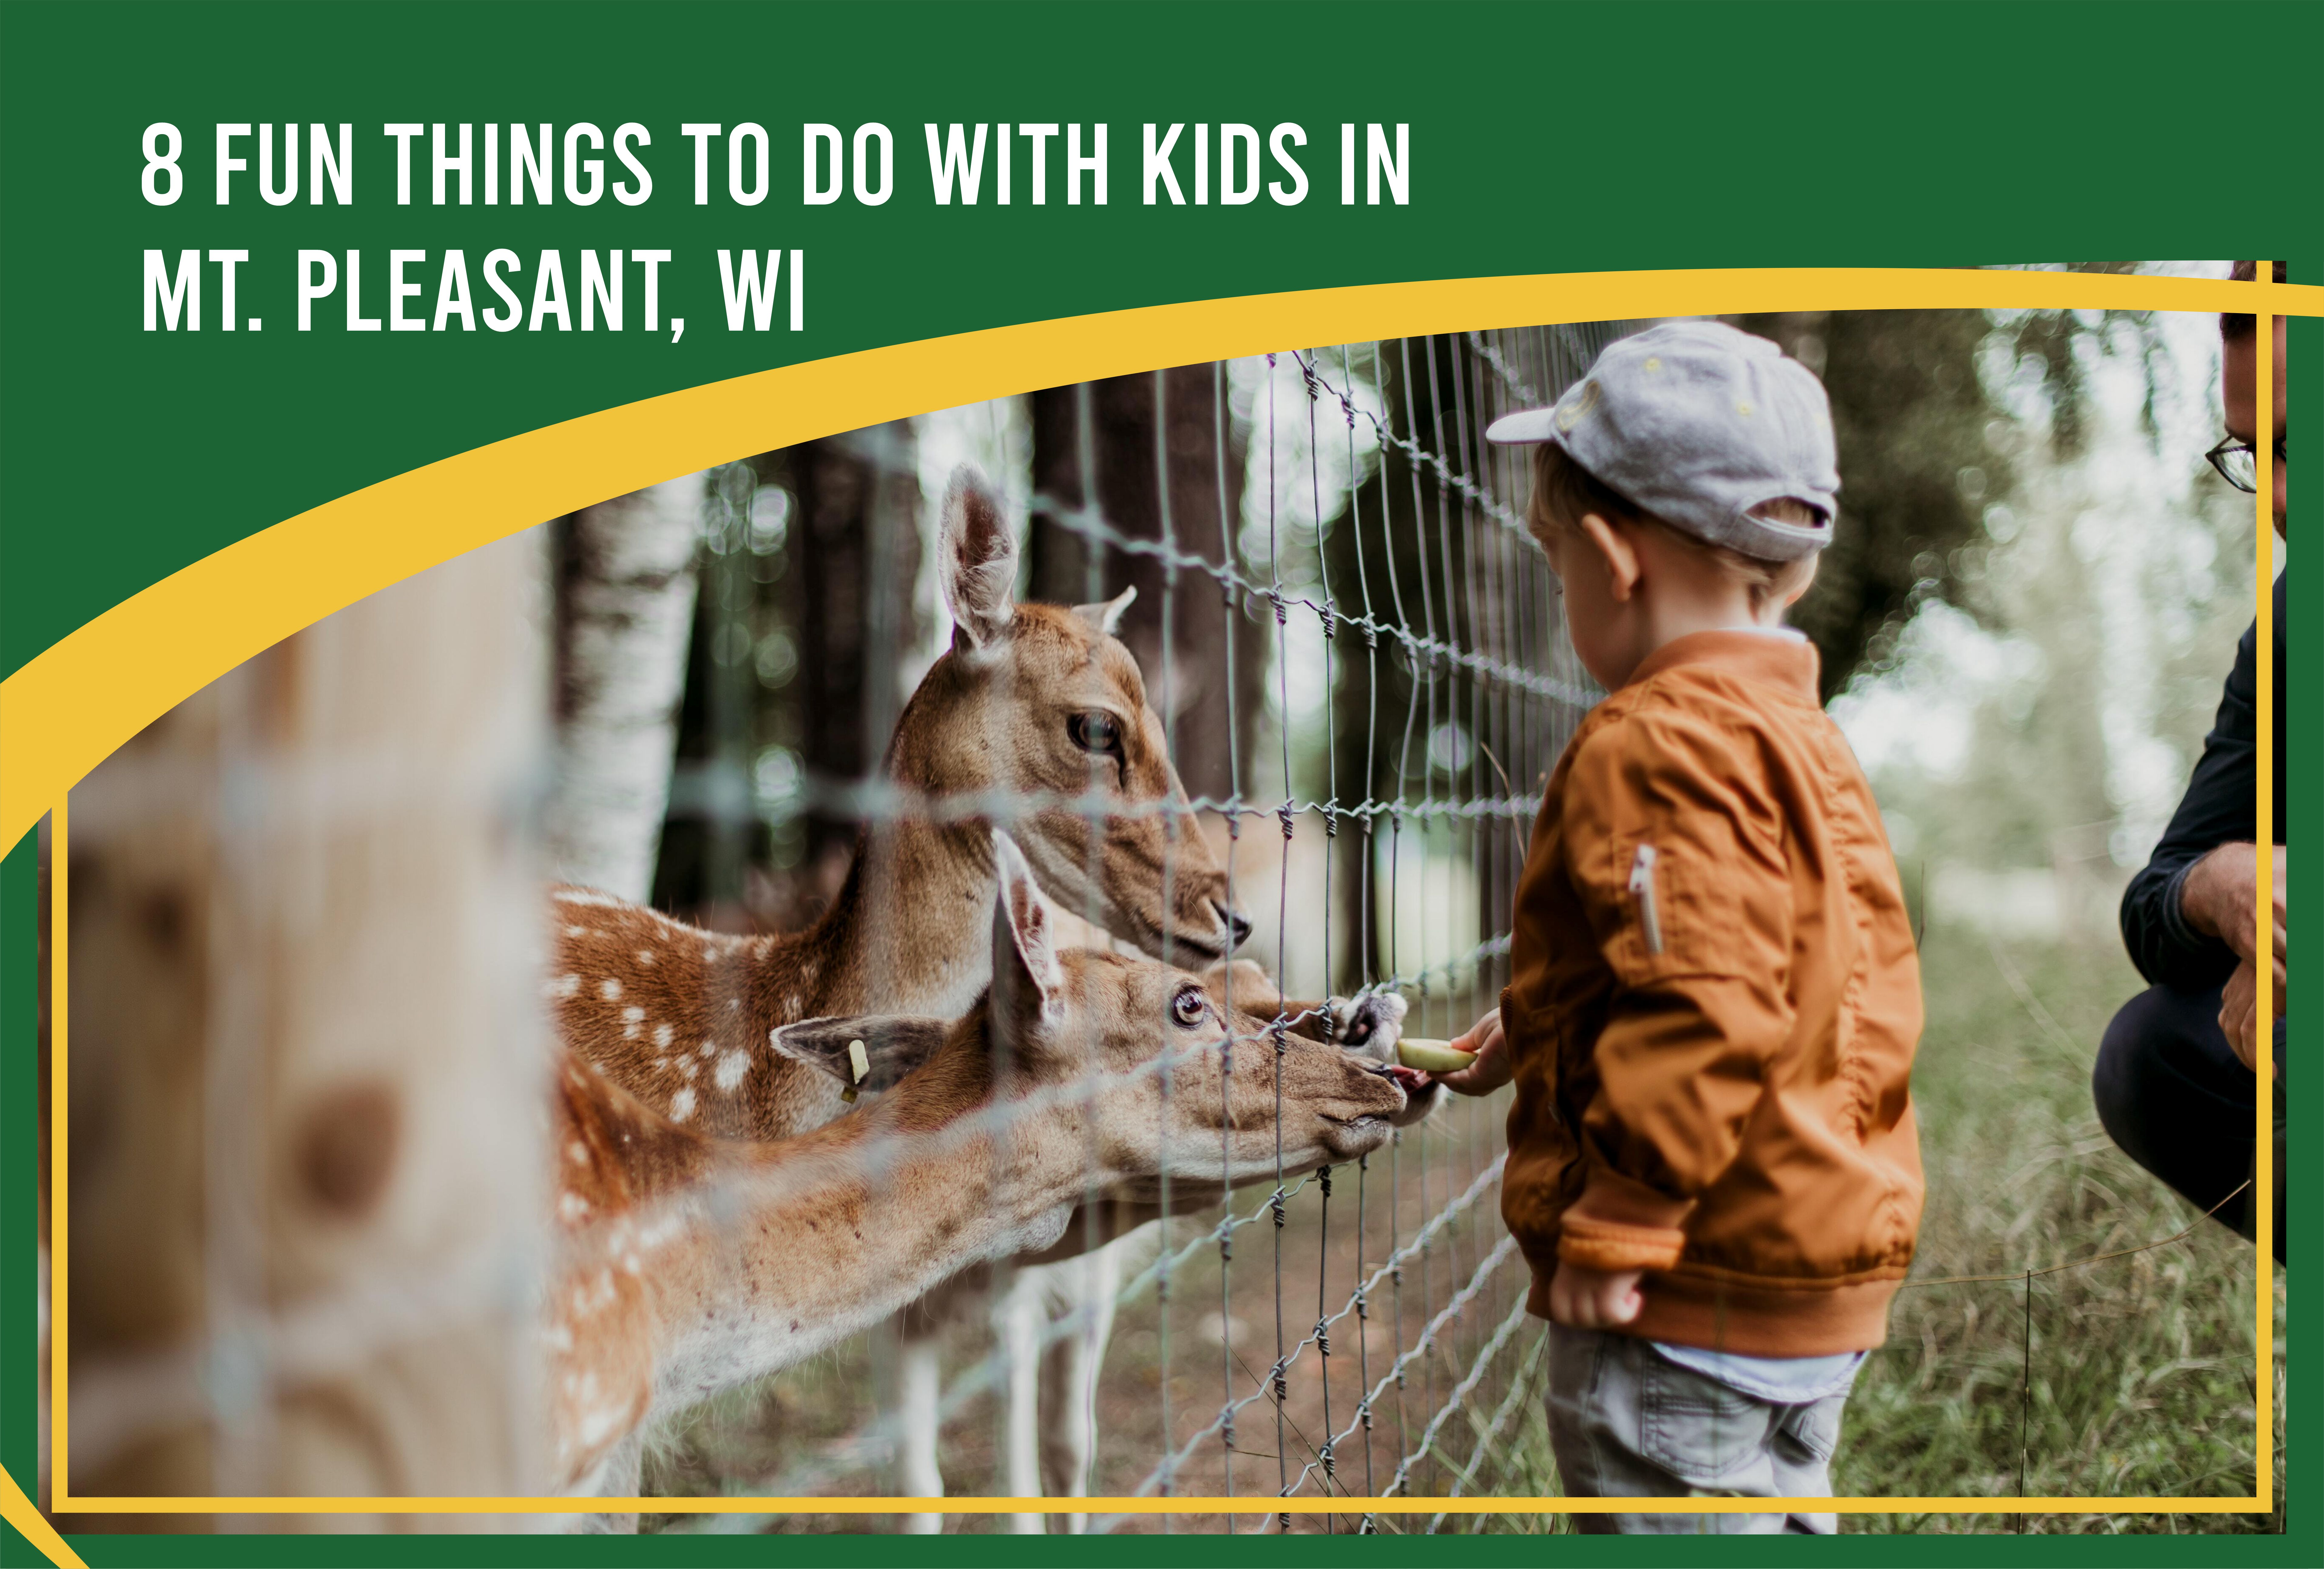 Fun Things to Do with Kids in Mt. Pleasant, WI